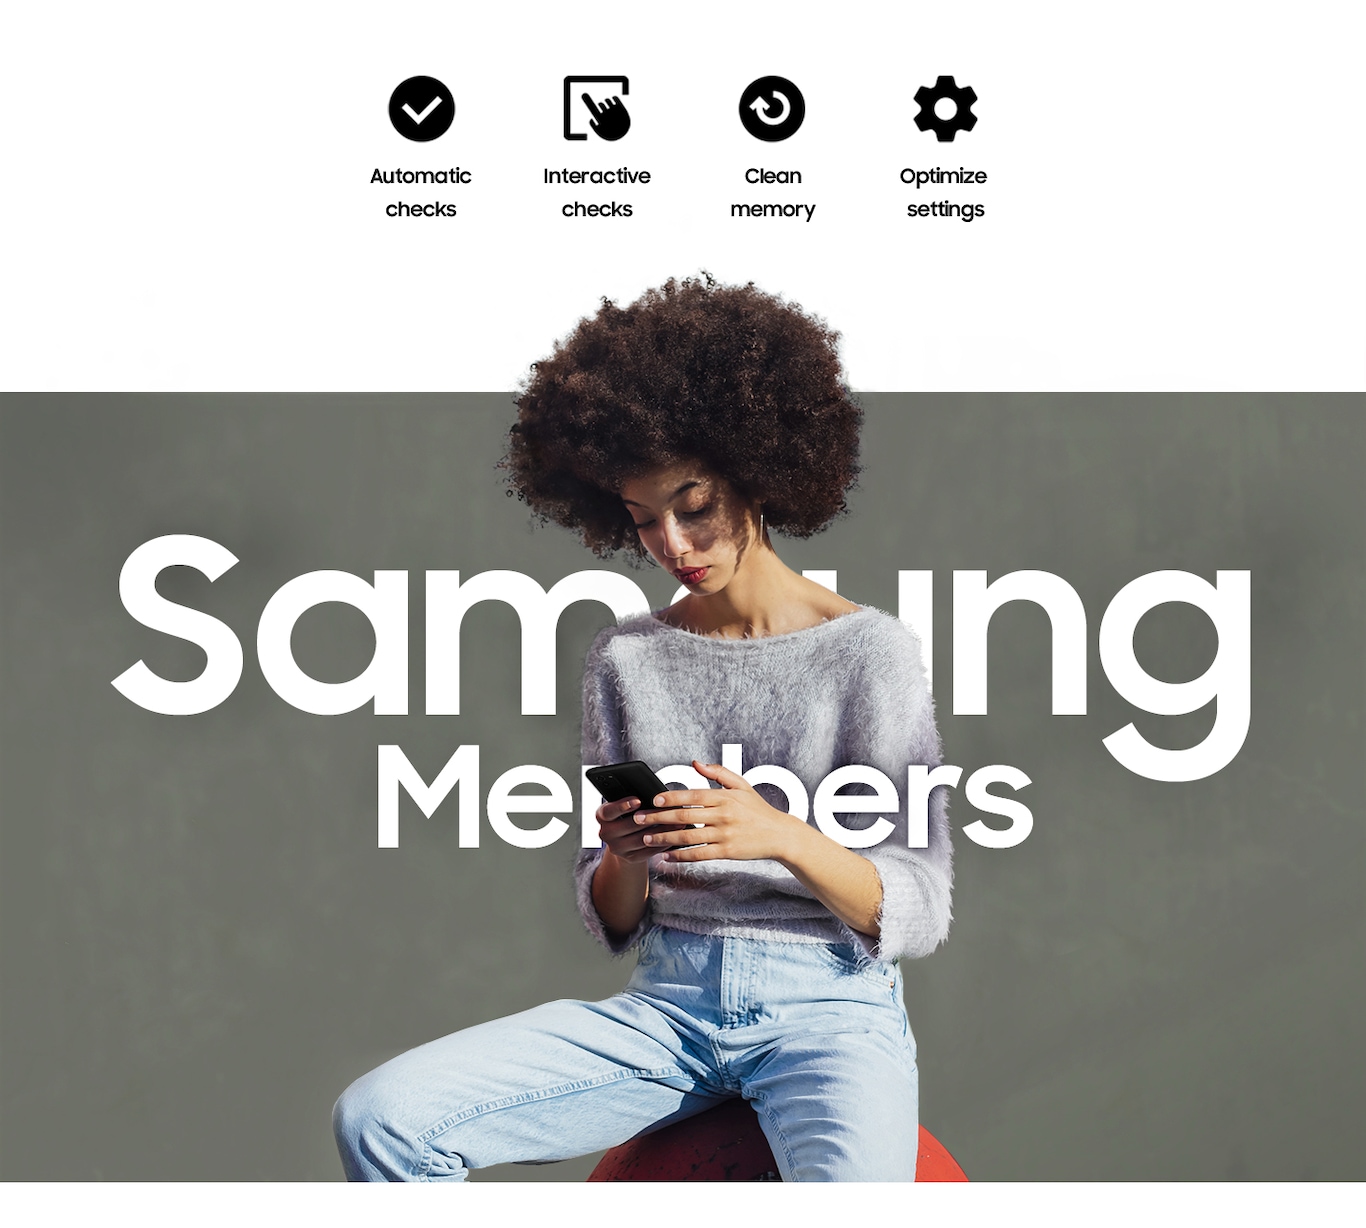 A woman sitting outside and using her phone. Text saying Samsung Members is written across her. Above her are four icons. A checkmark icon for Automatic checks, an icon of a hand tapping a screen for Interactive checks, an icon of arrow going in a circle for Clean memory and a cog icon for Optimize settings.